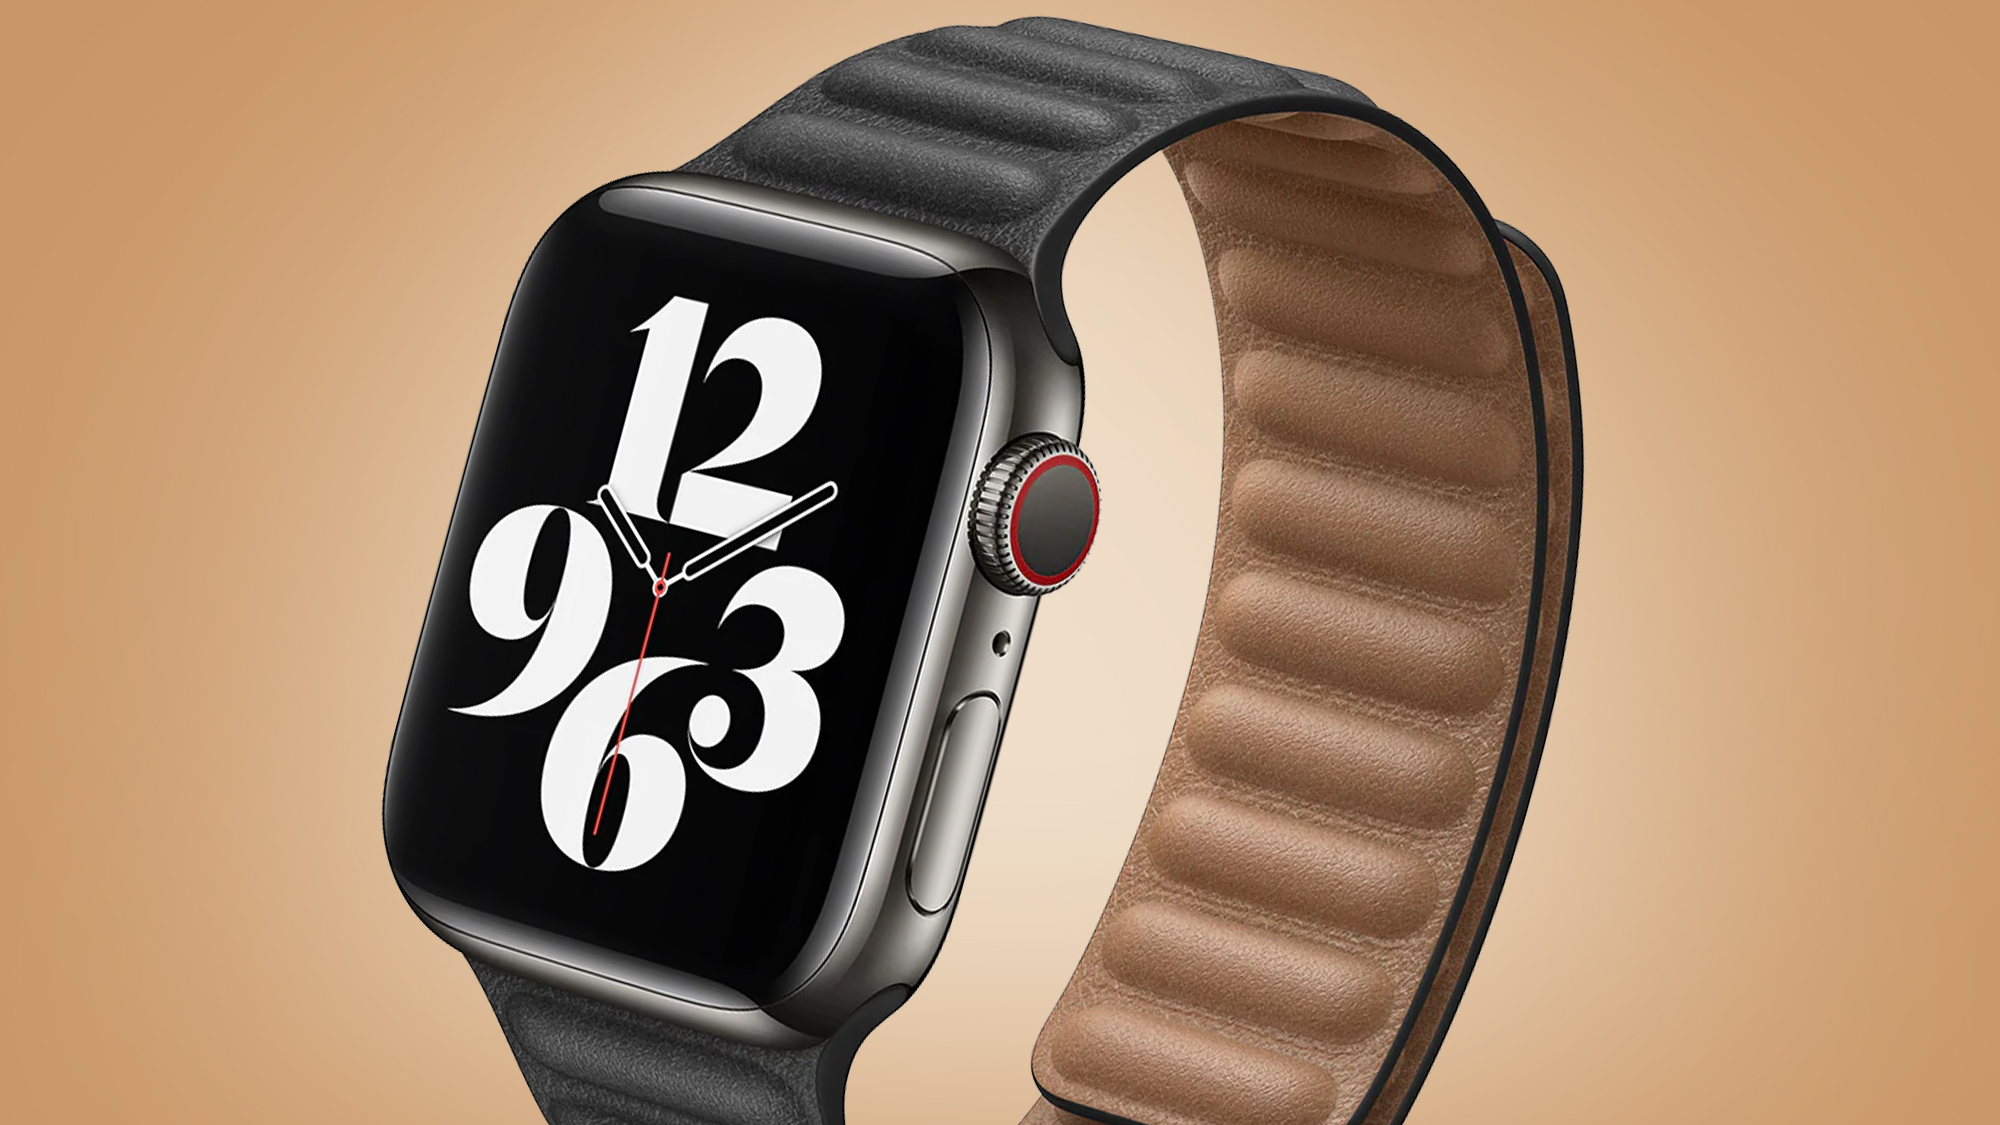 An Apple Watch with the Leather Link band on a beige background